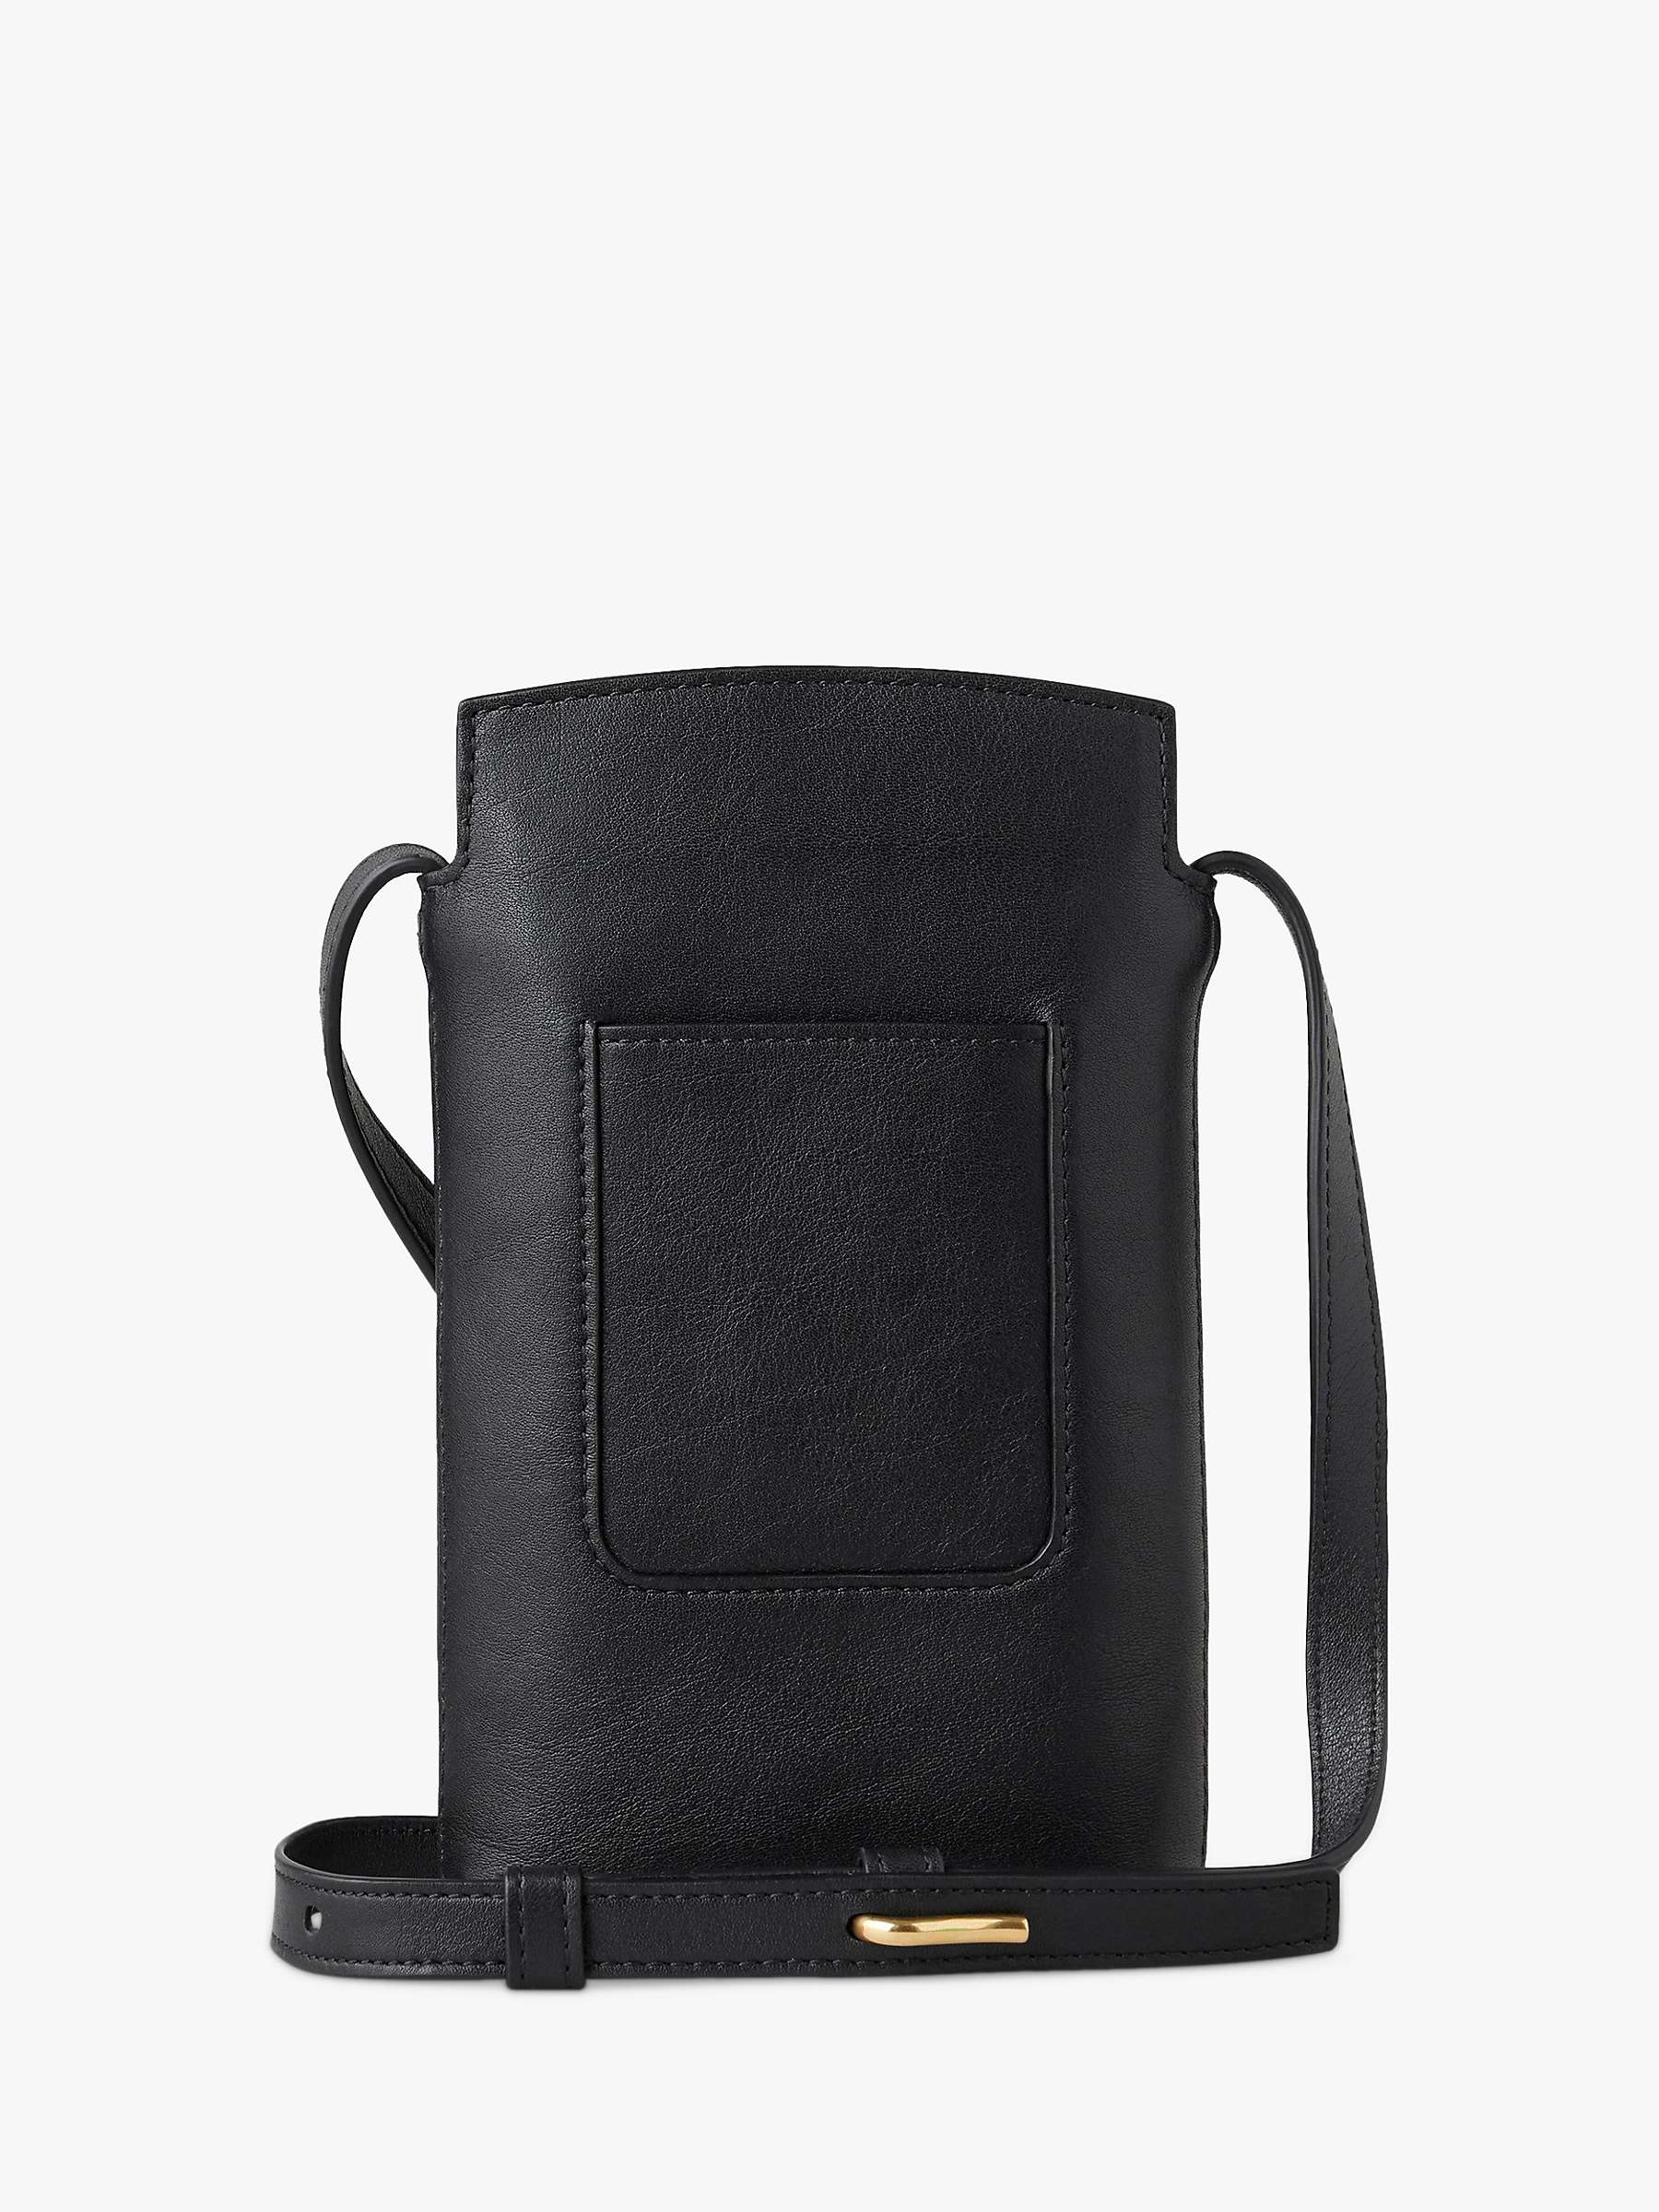 Buy Mulberry Clovelly Silky Calf Leather Phone Pouch, Black Online at johnlewis.com